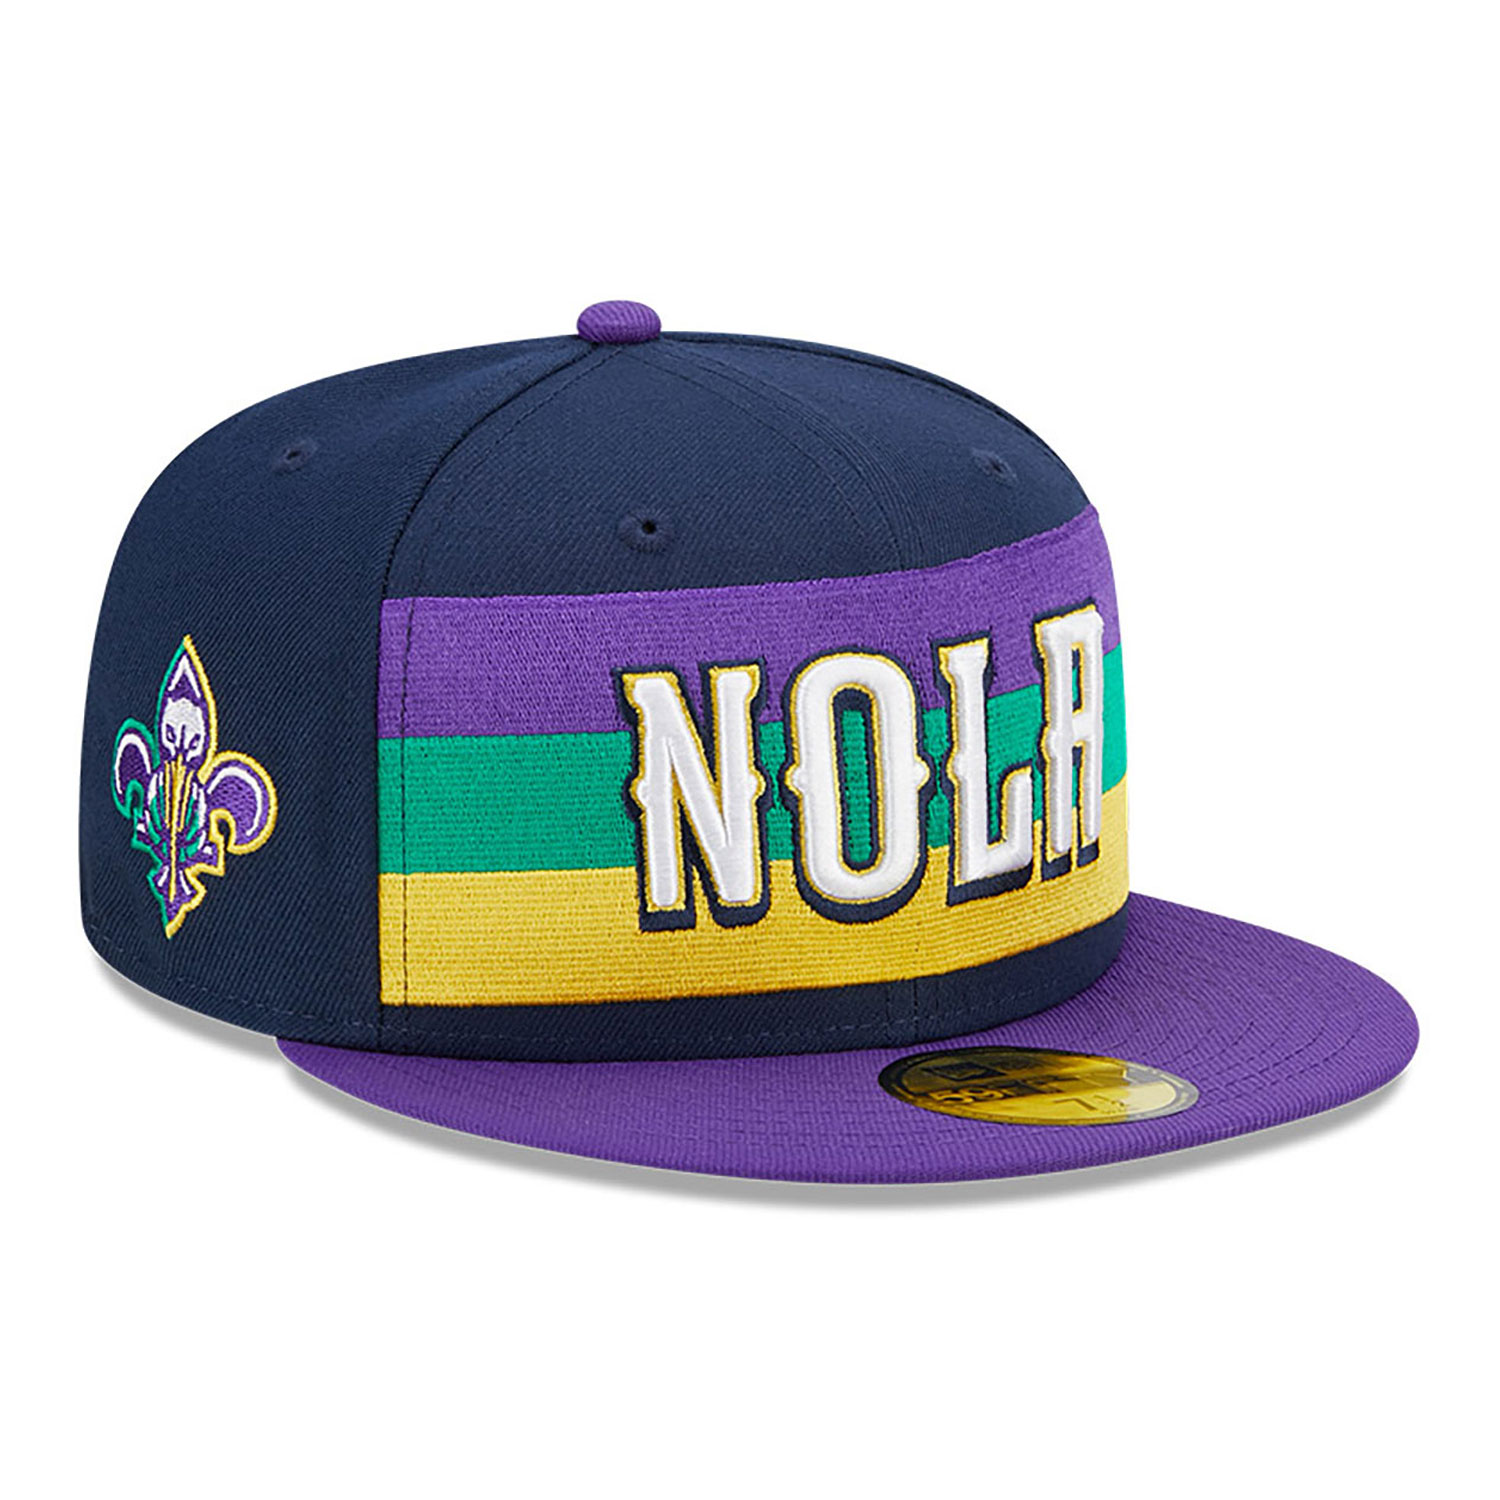 New Orleans Pelicans Authentics City Edition Navy 59FIFTY Fitted Cap